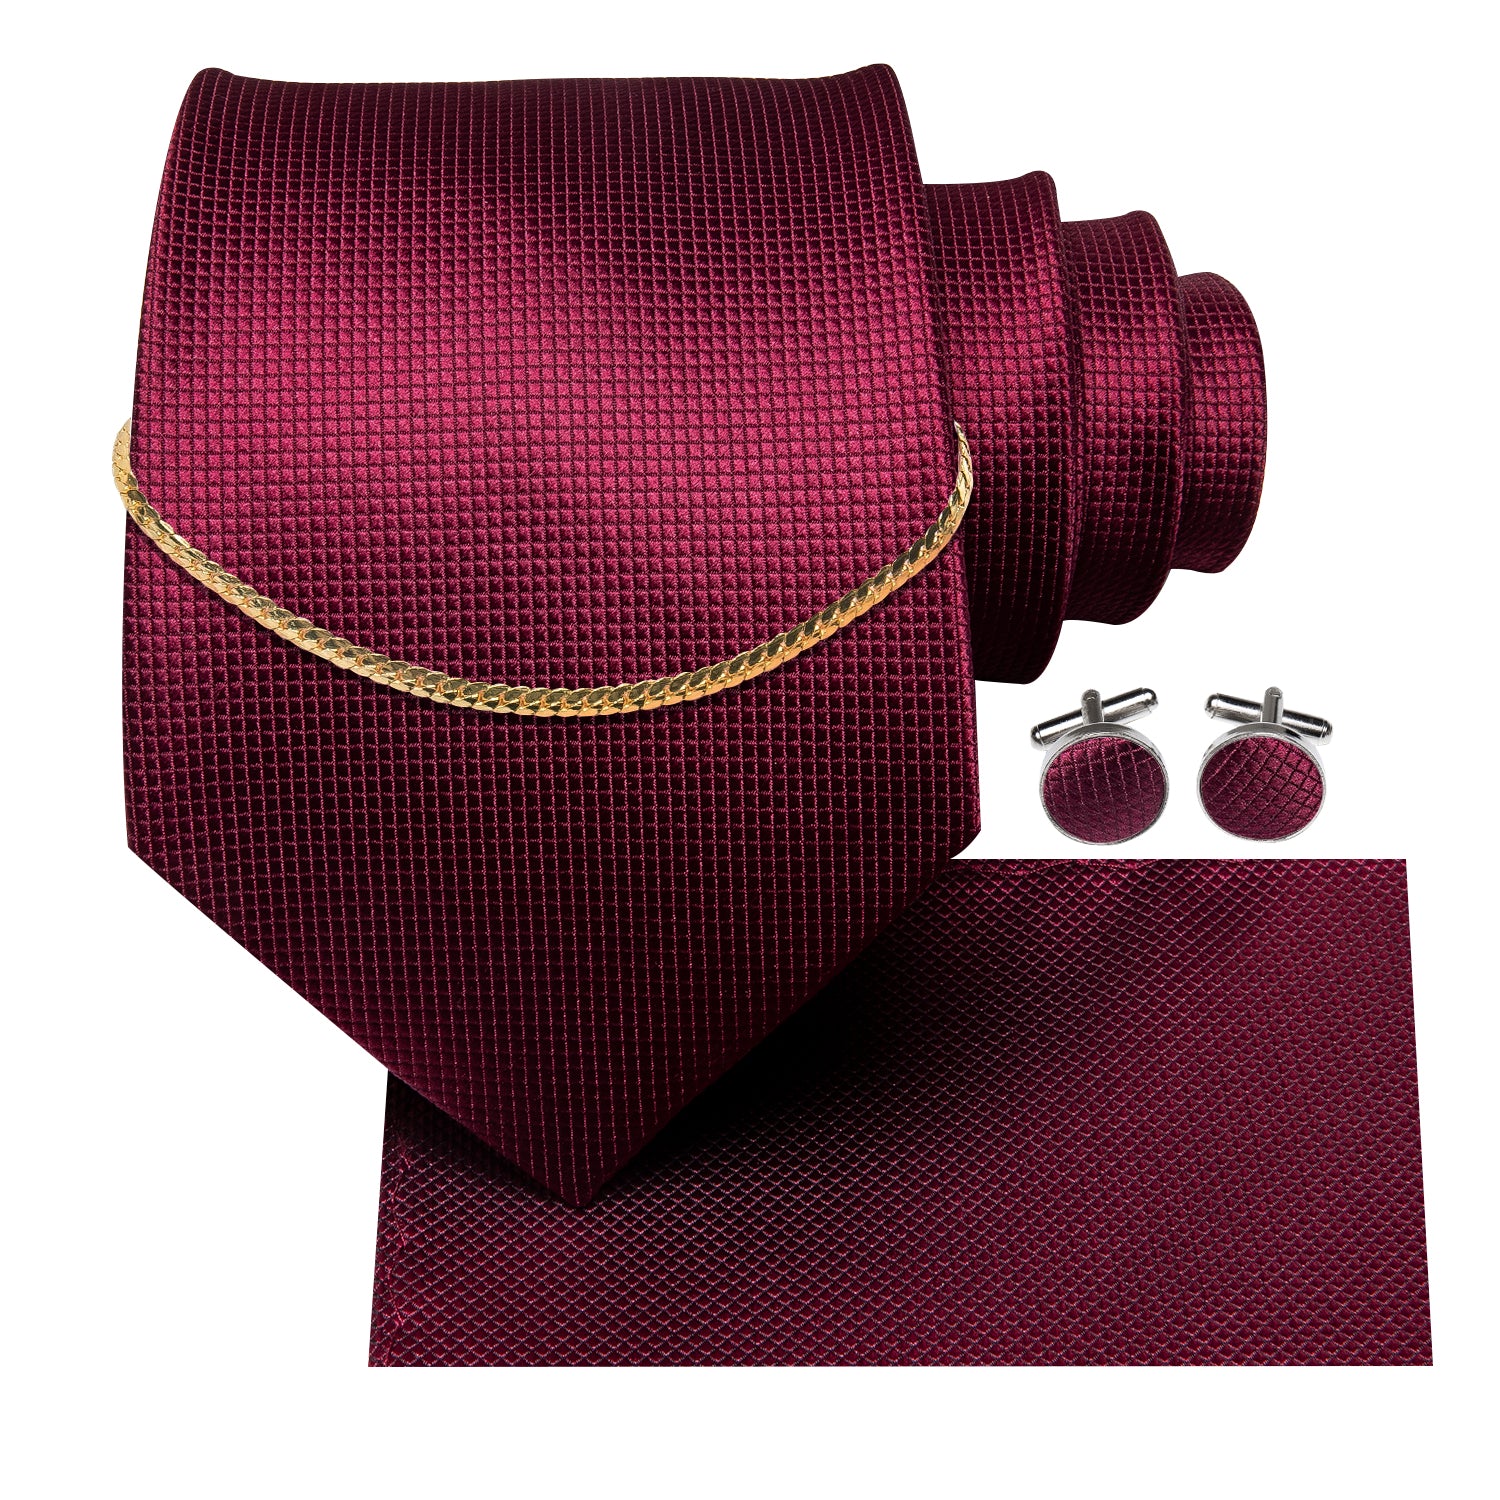 Red Solid Men's Tie Pocket Square Cufflinks Set With Golden Chain